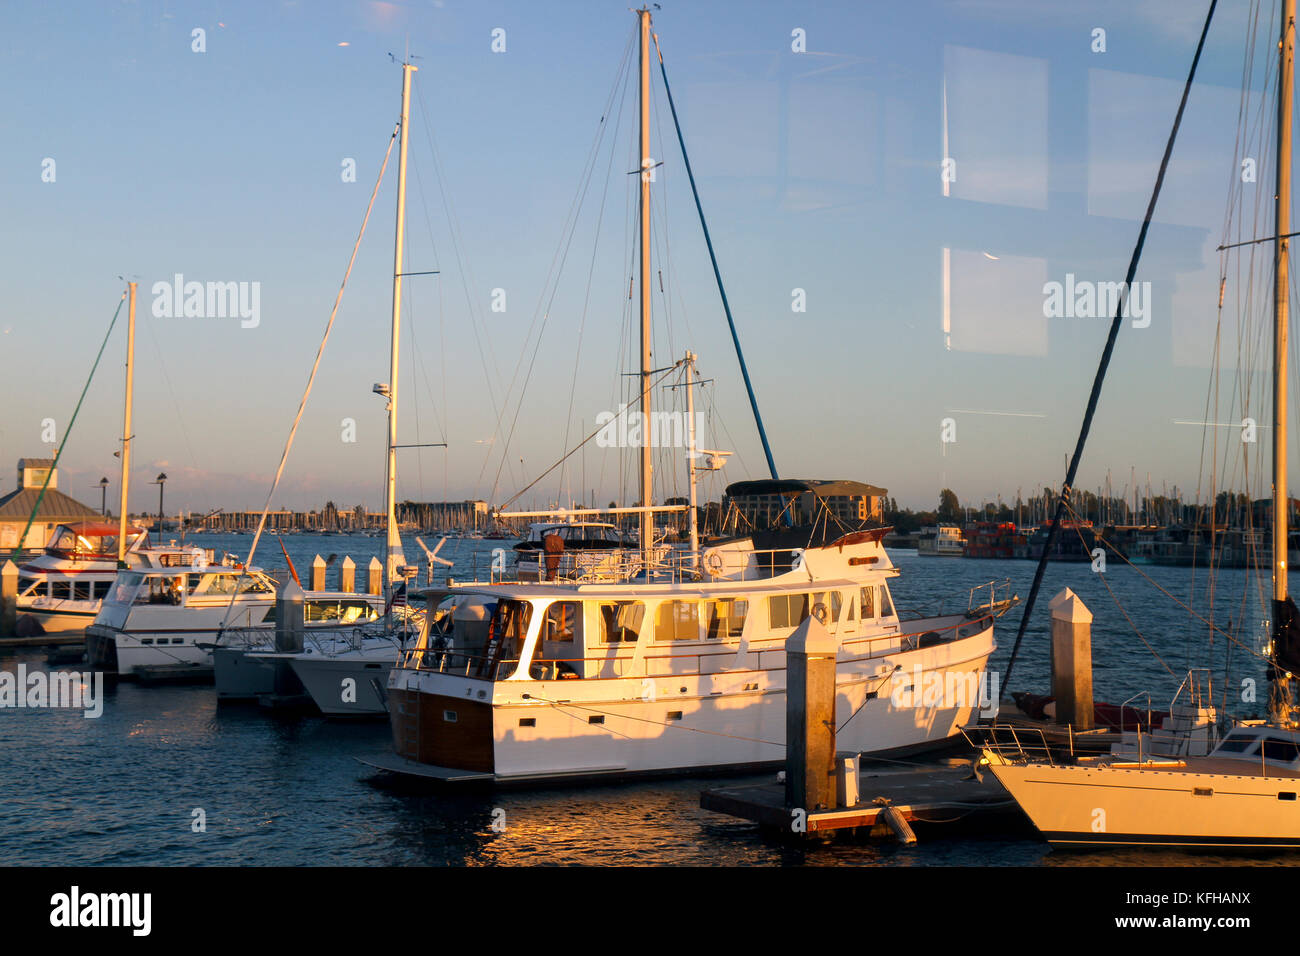 Sunset view from a table at Kincaid's Restaurant, Jack London Square, Oakland, California, United States Stock Photo